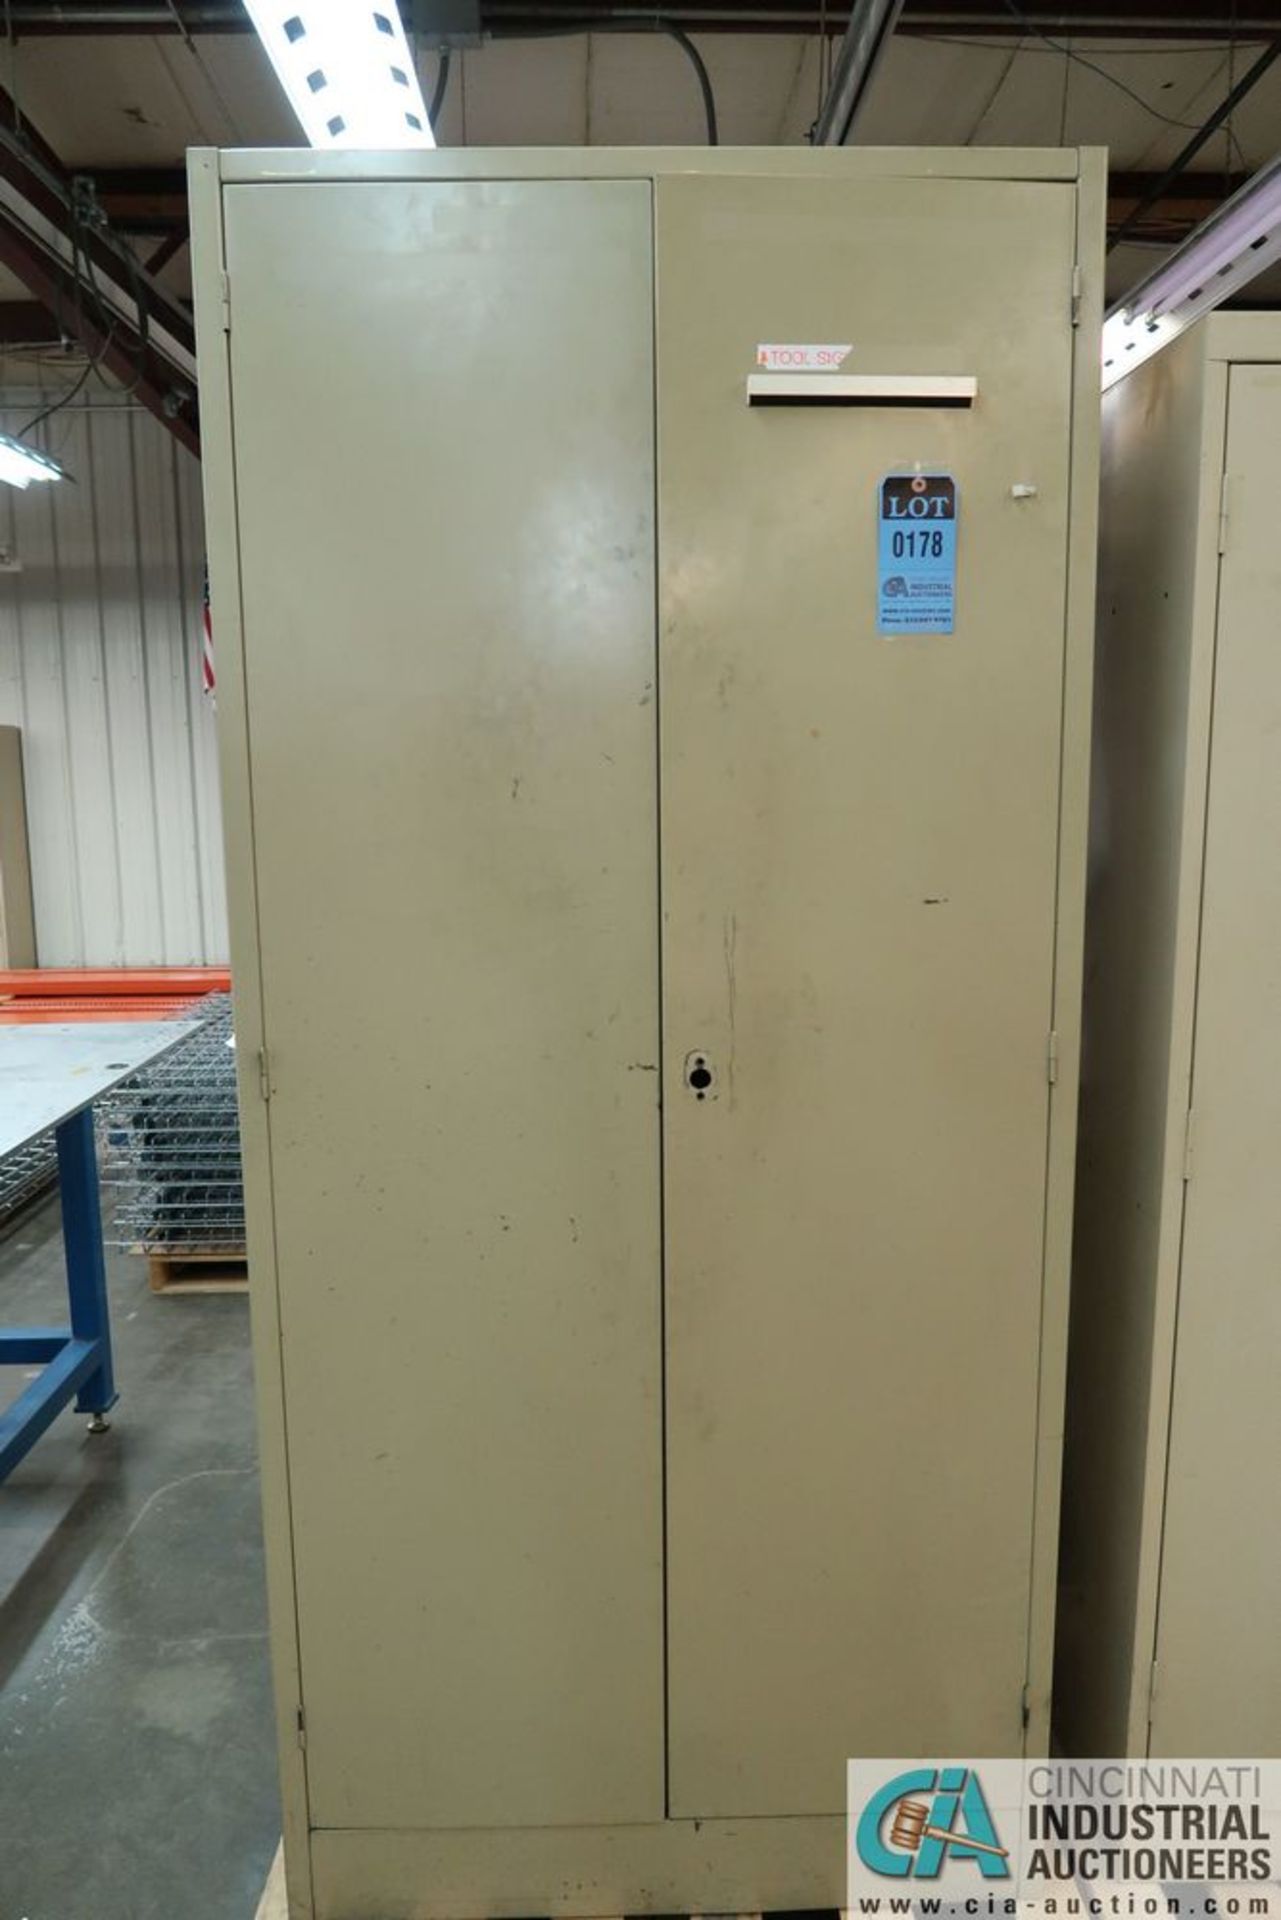 TWO-DOOR STORAGE CABINET WITH MISCELLANEOUS SHOP SUPPORT EQUIPMENT